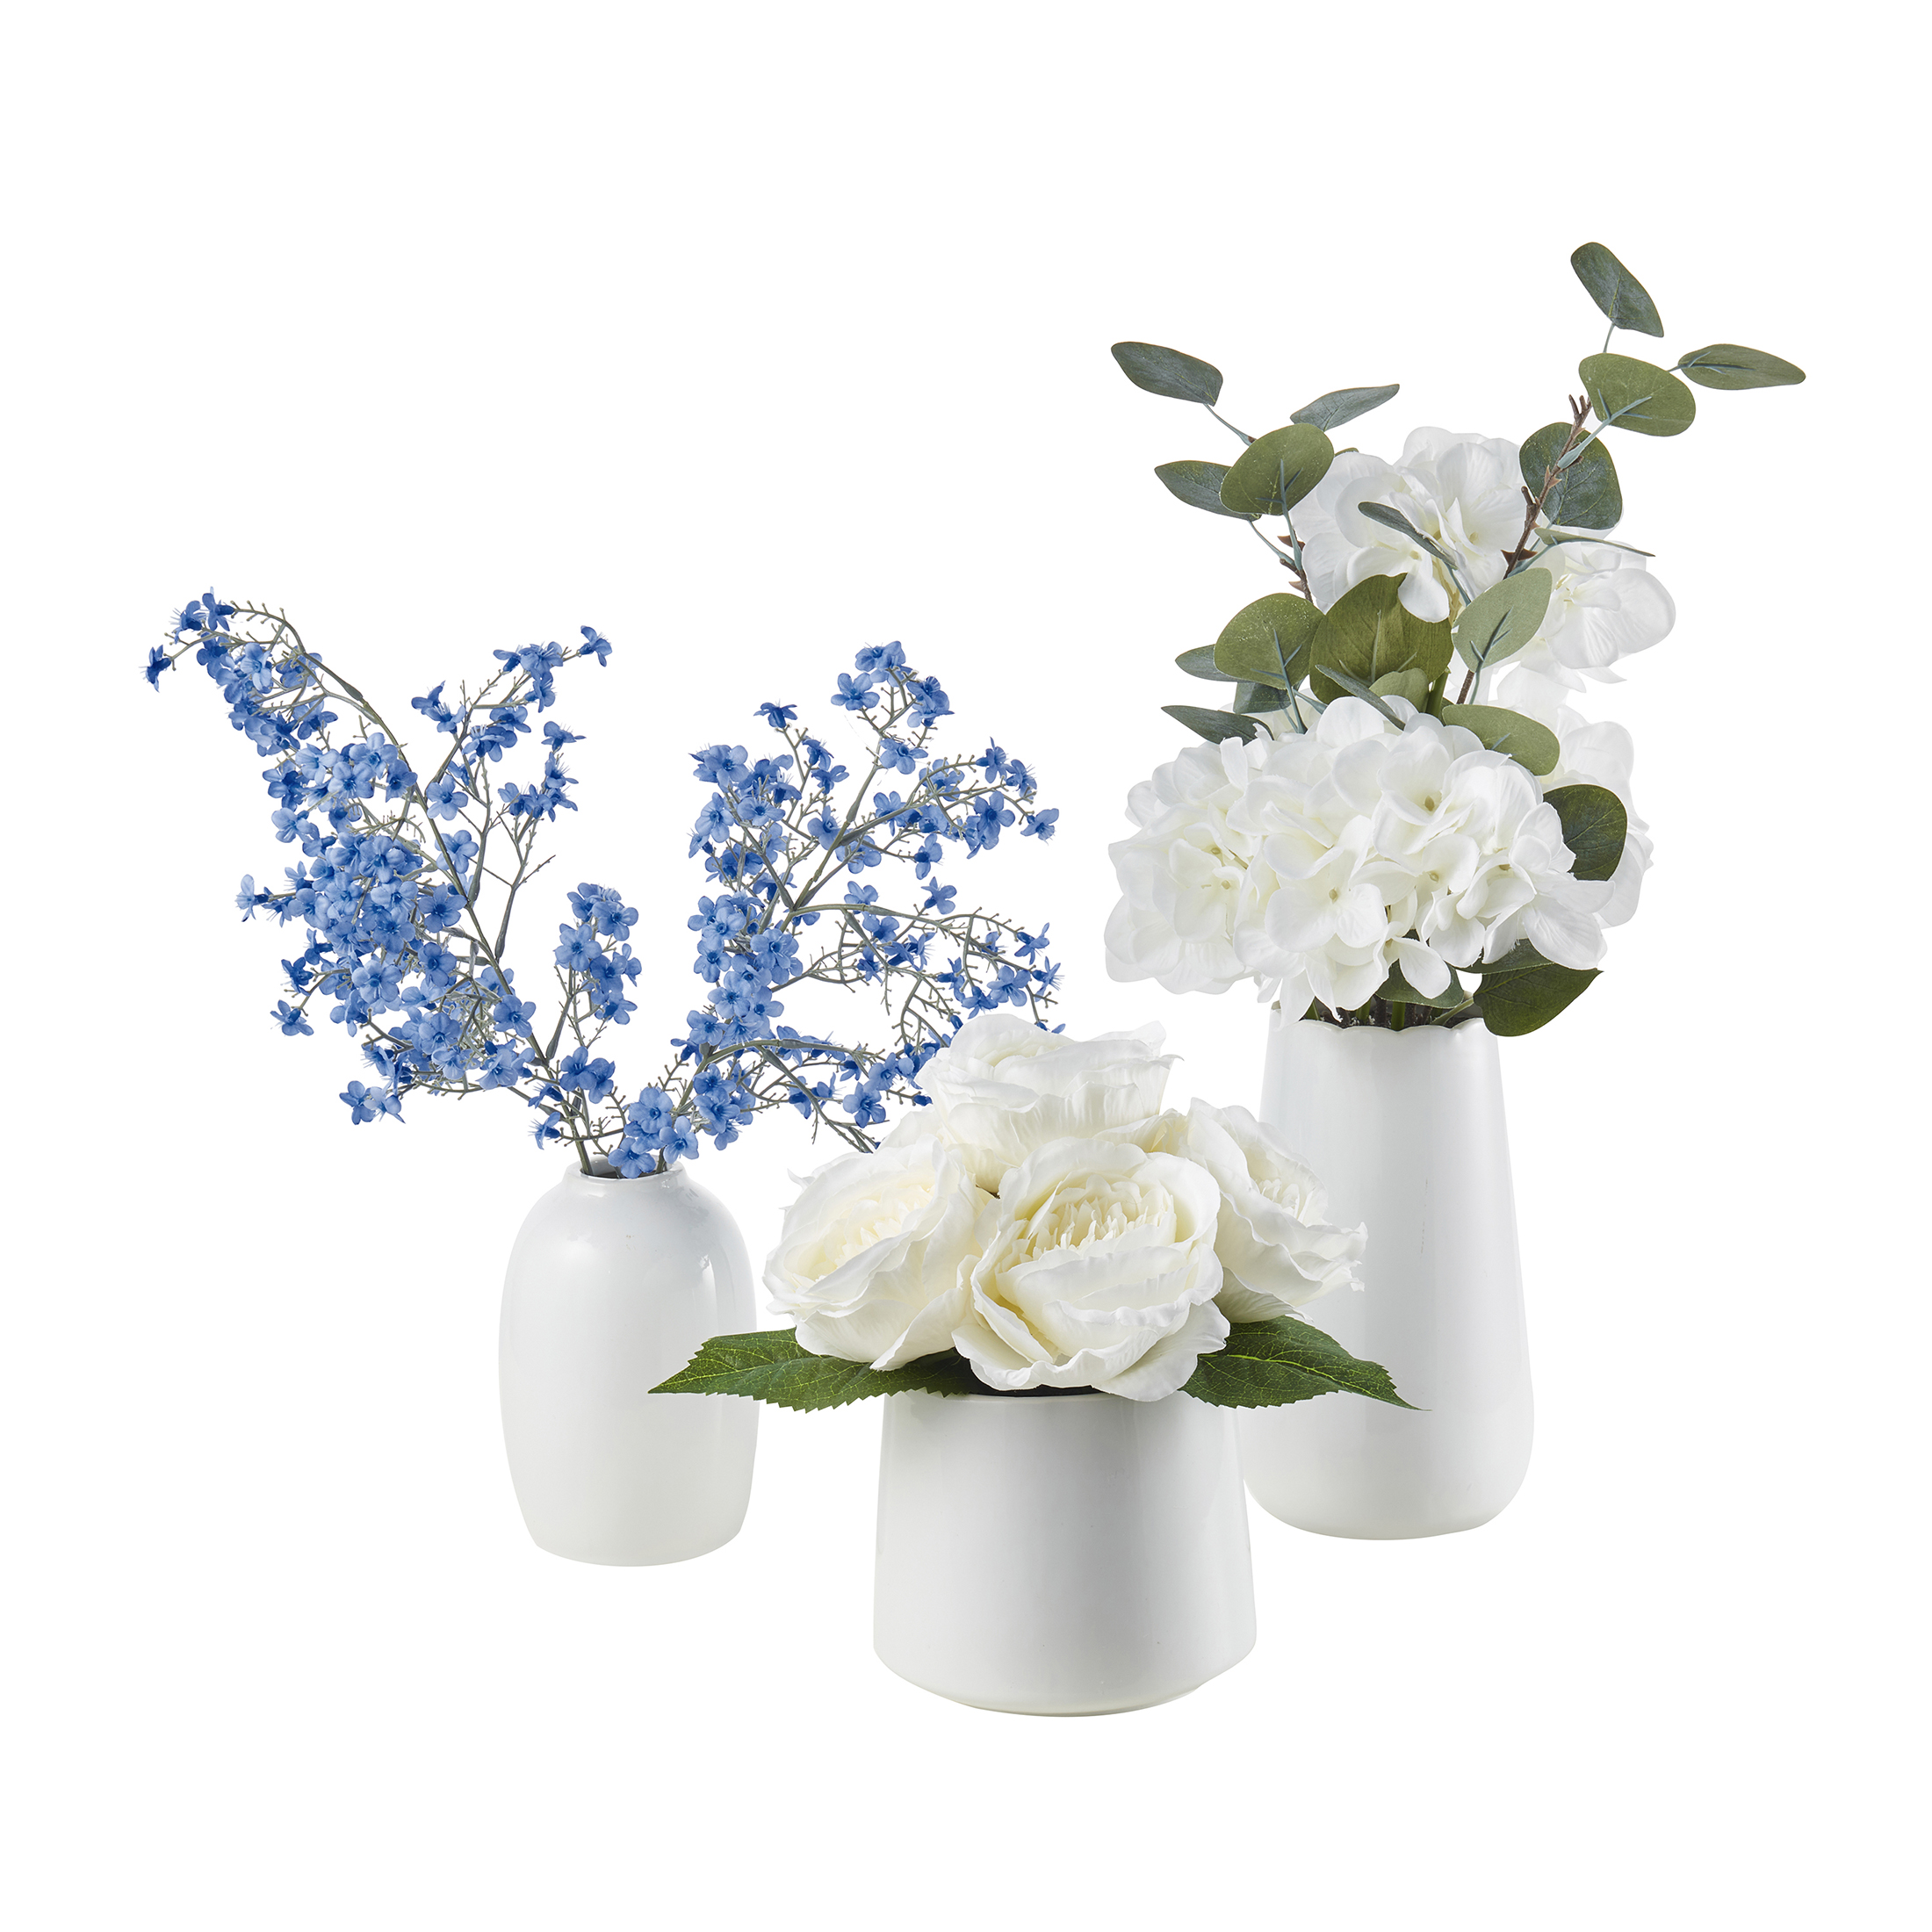 My Texas House Blue Faux Floral Springs in White Ceramic Vase, 16" Height - image 4 of 7